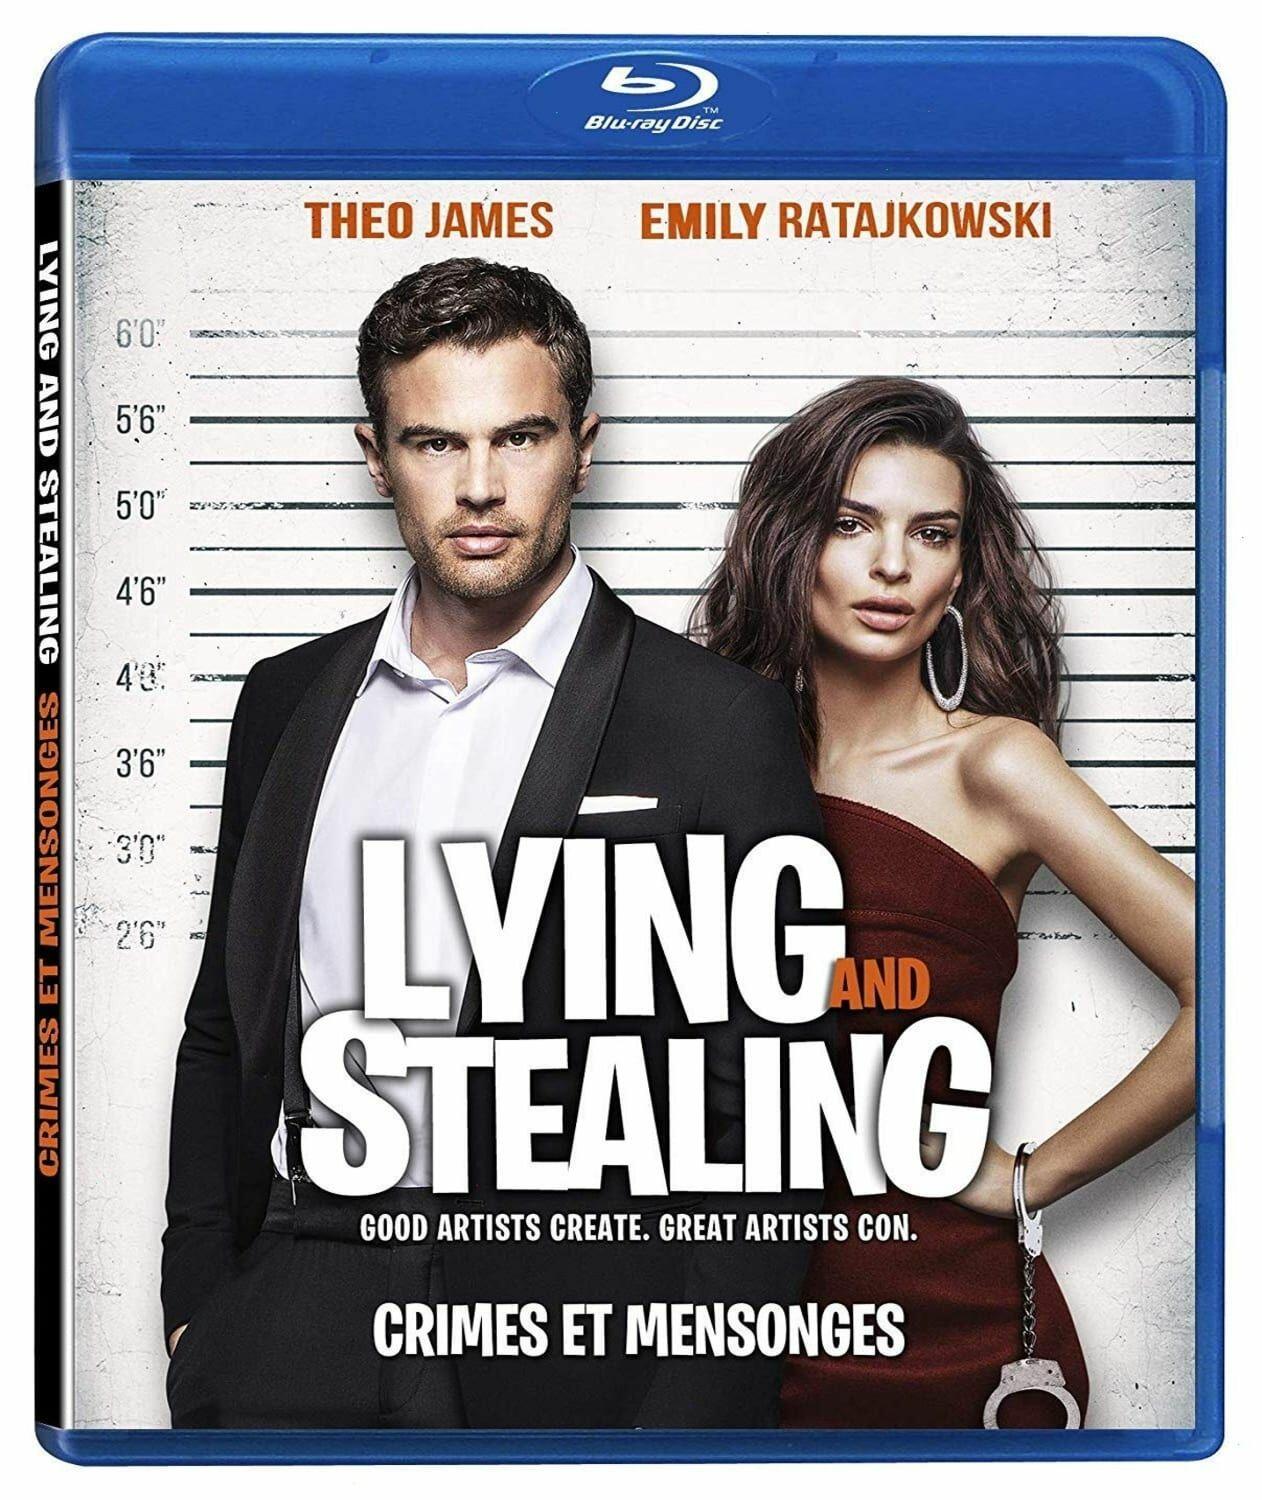 Lying and Stealing (Bluray)